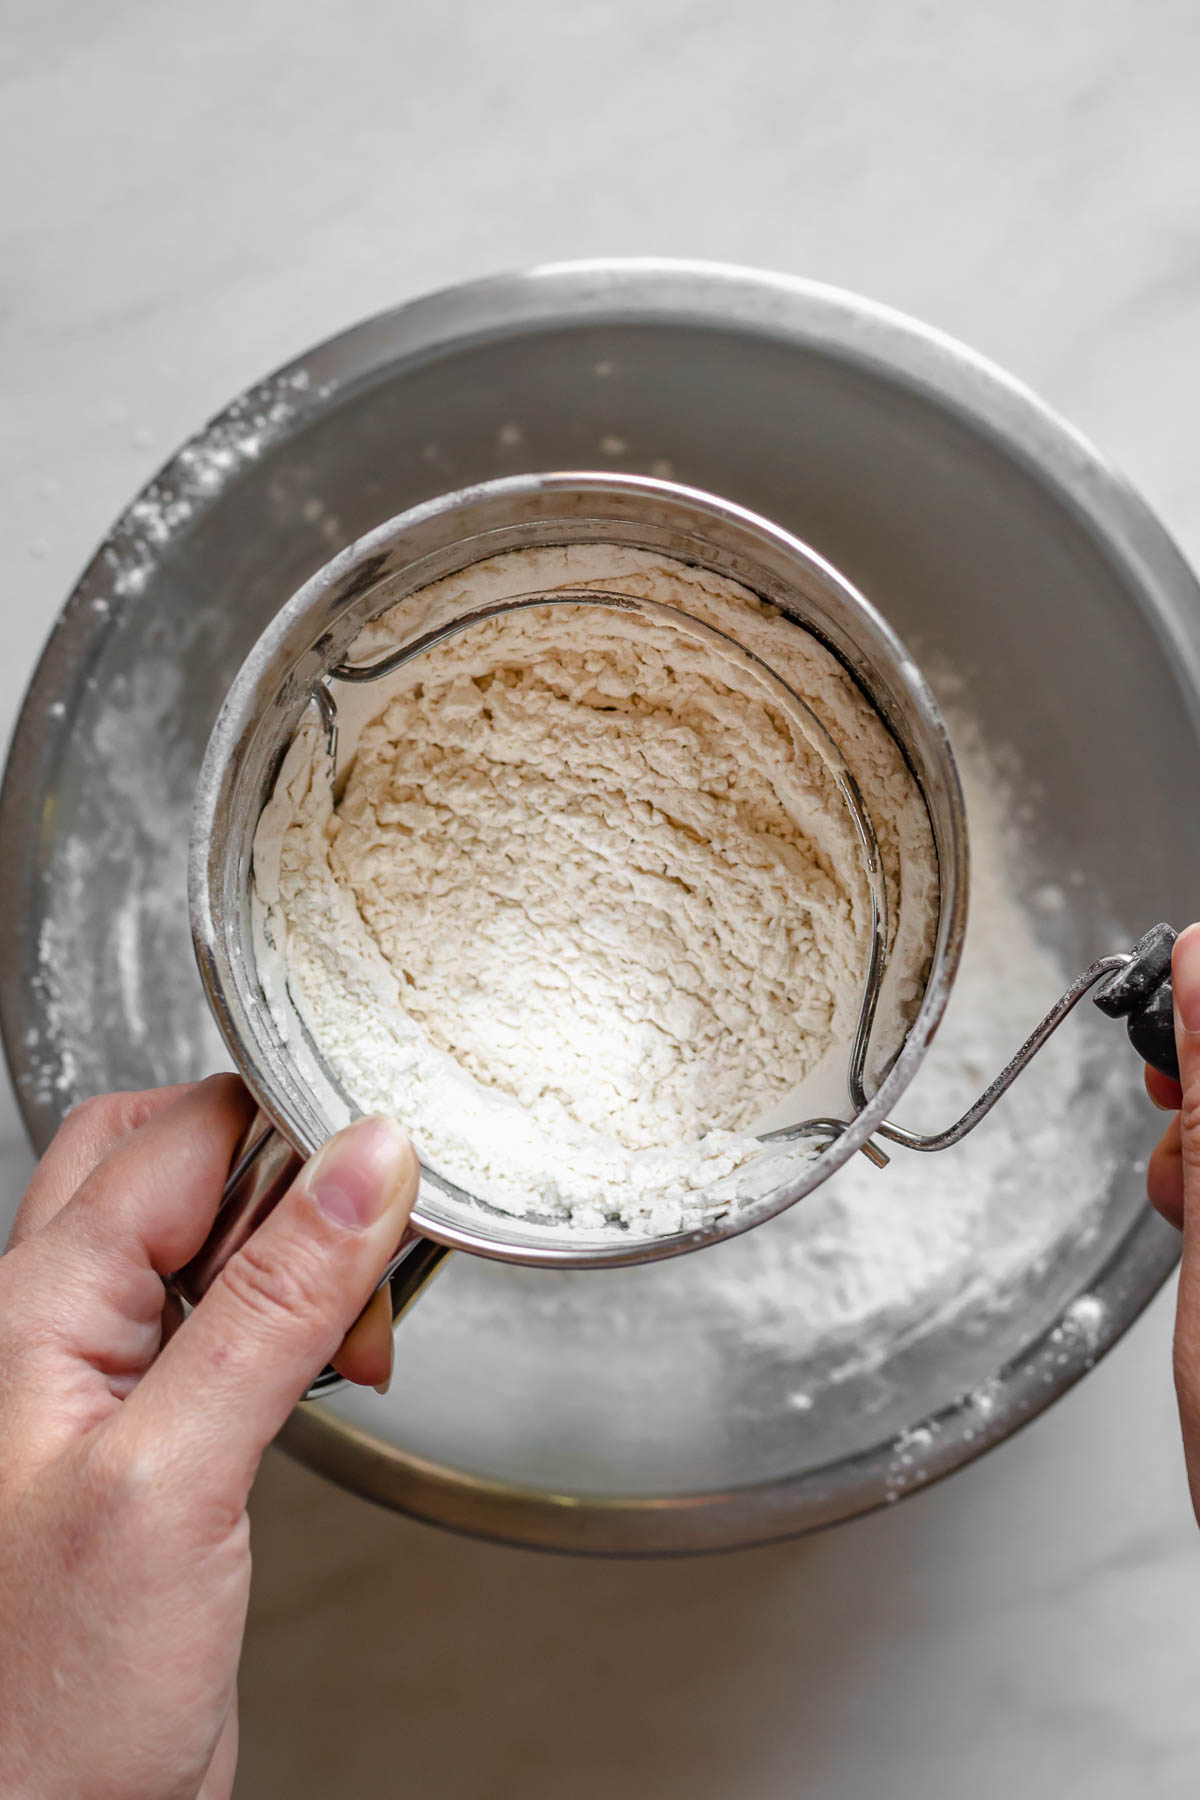 Sifting flour into a bowl.